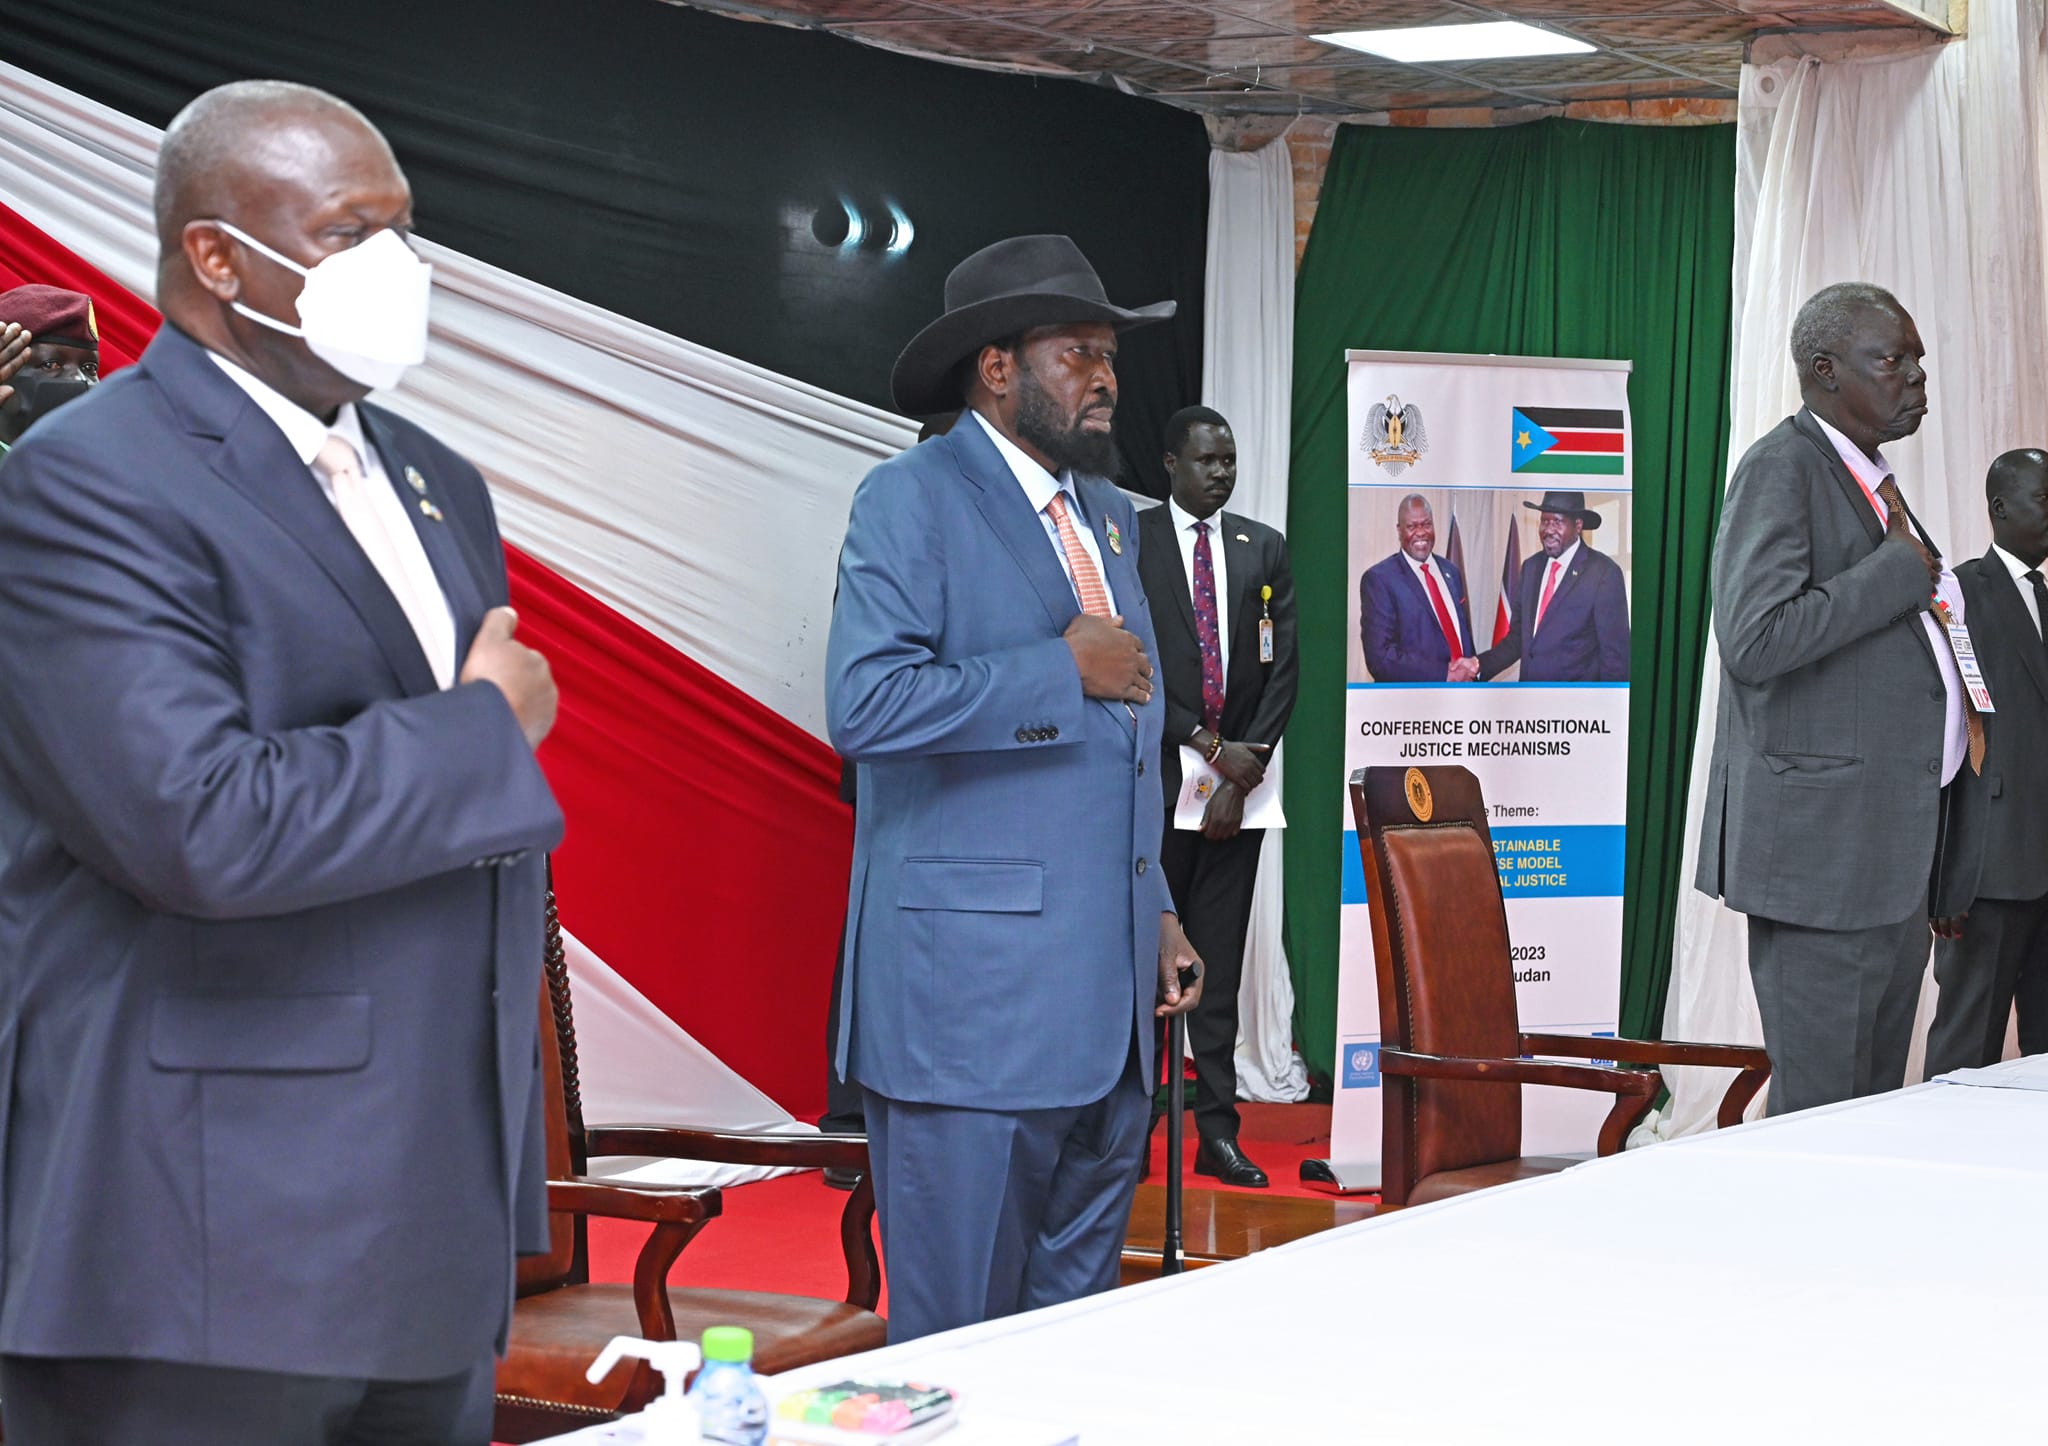 Justice mechanism conference: Kiir, Machar fazed by absence of holdout parties